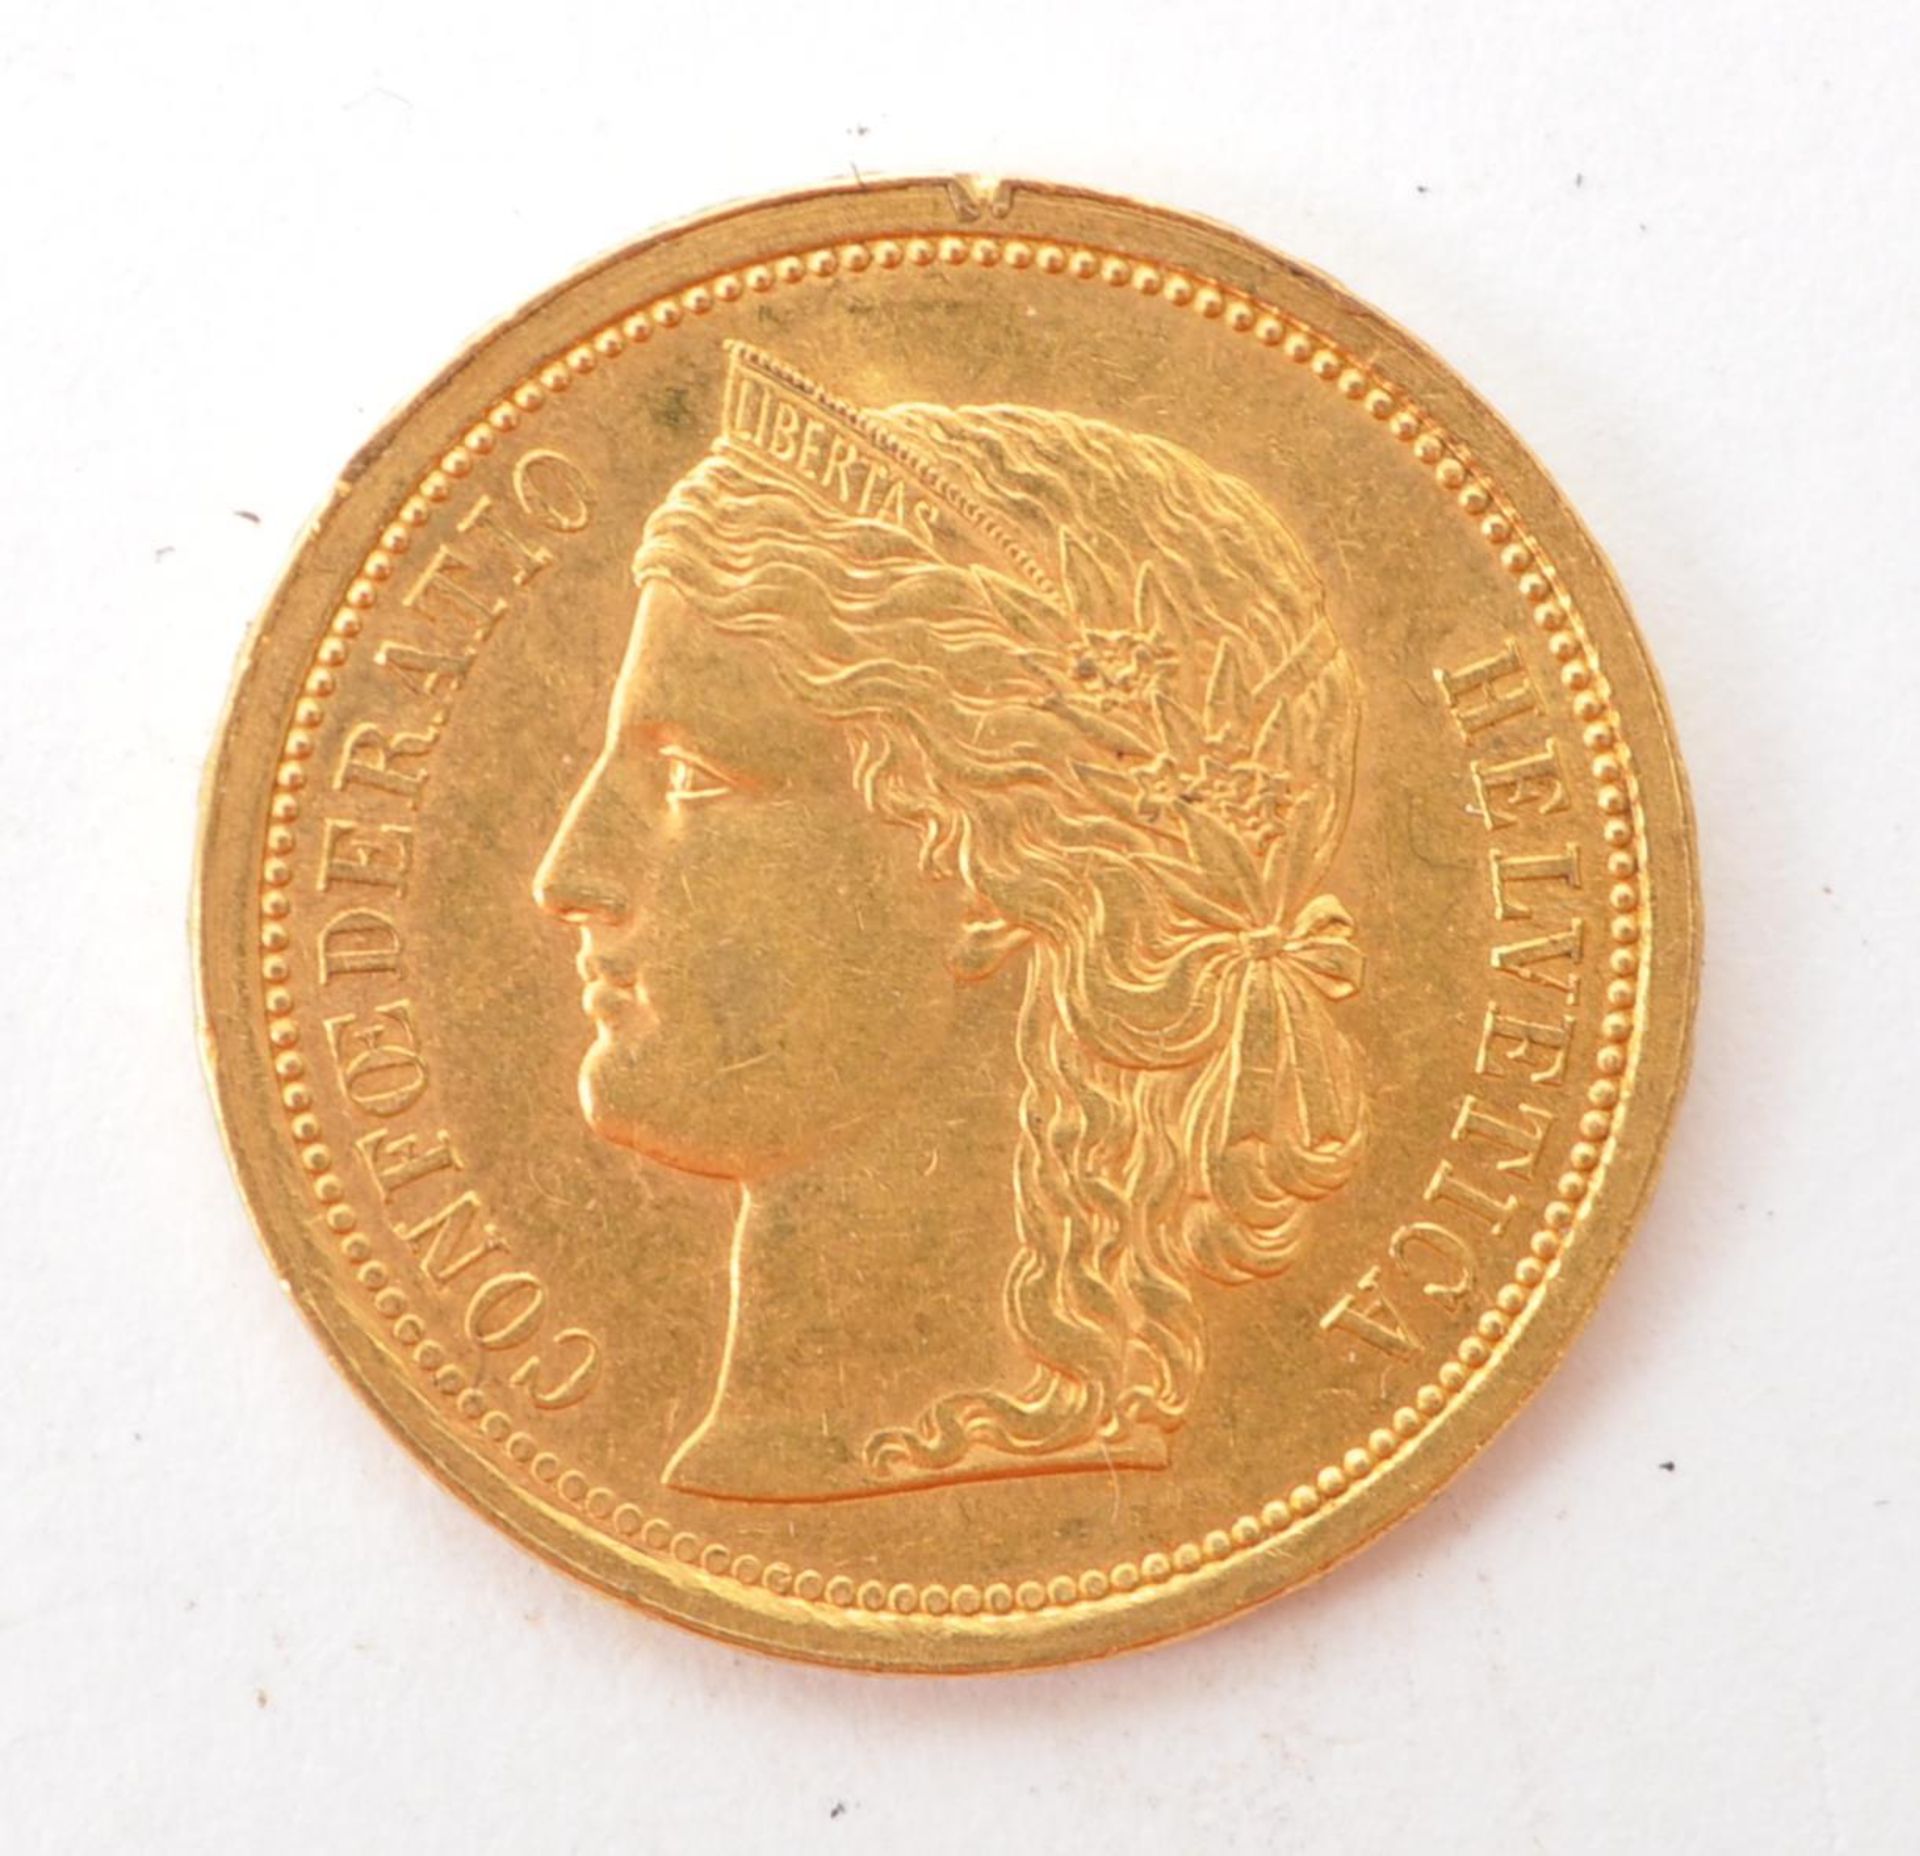 LATE 19TH CENTURY 1886 SWISS 20 FRANC GOLD COIN